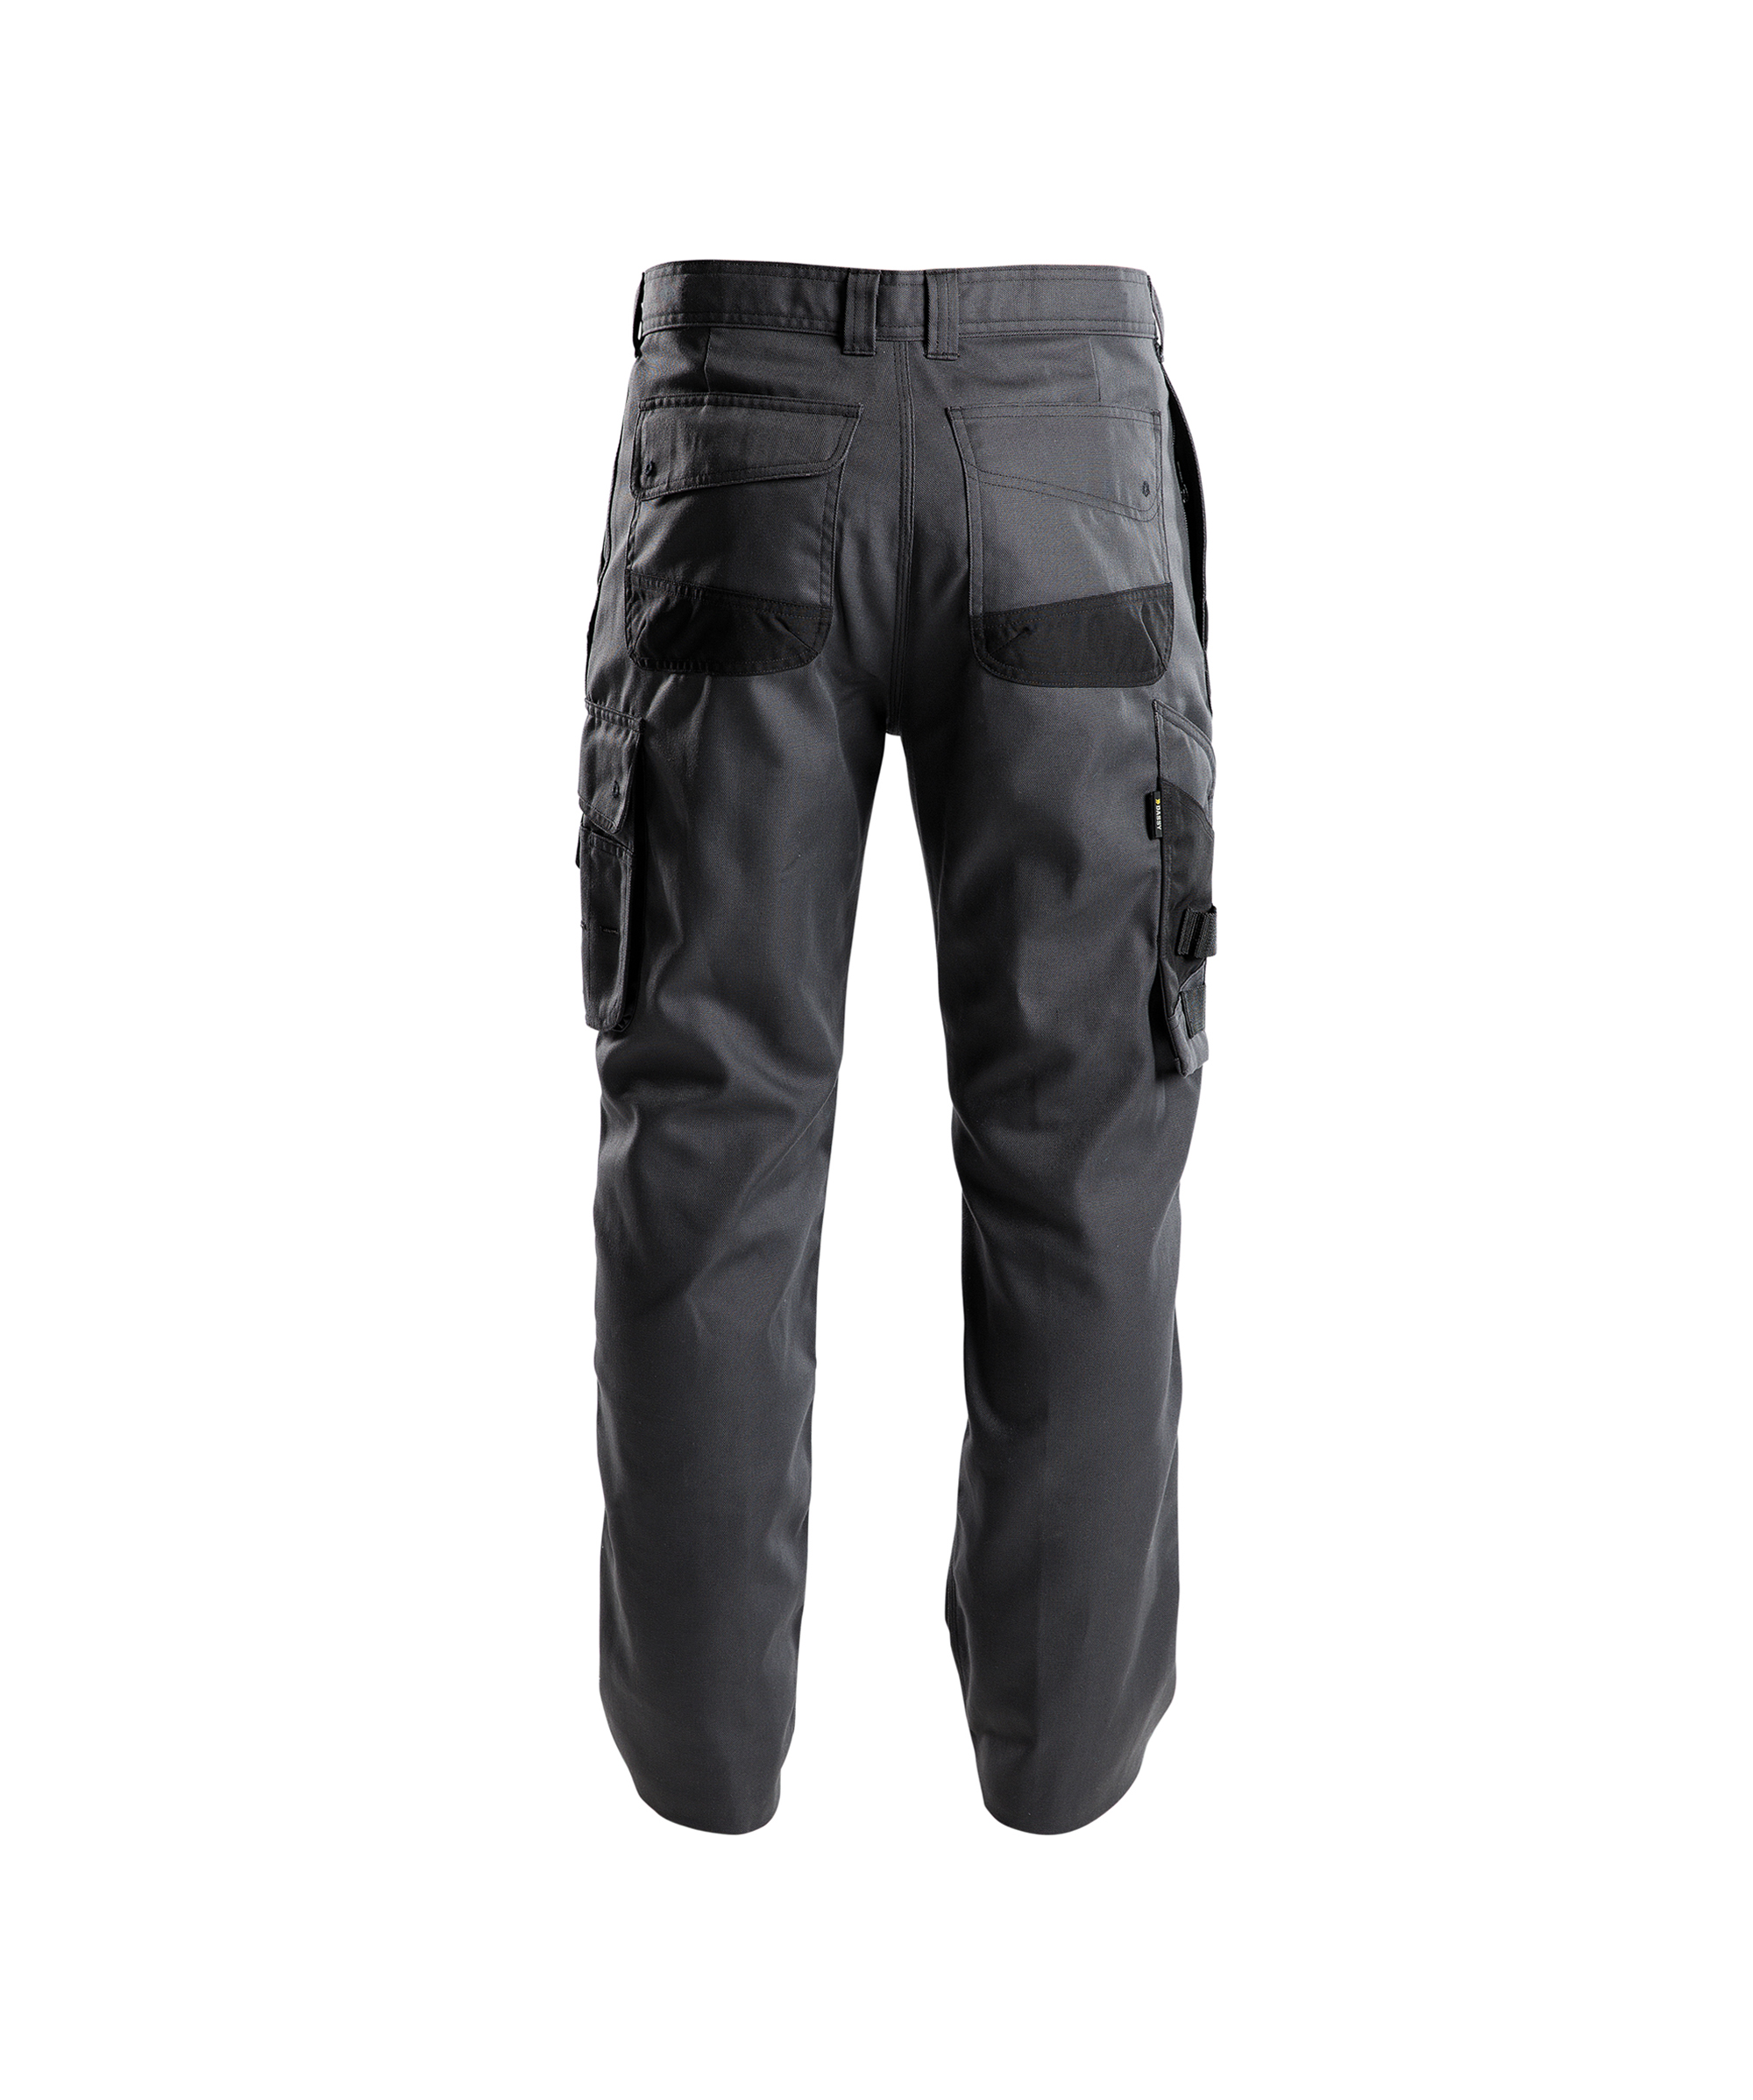 connor_canvas-work-trousers-with-knee-pockets_anthracite-grey-black_back.jpg